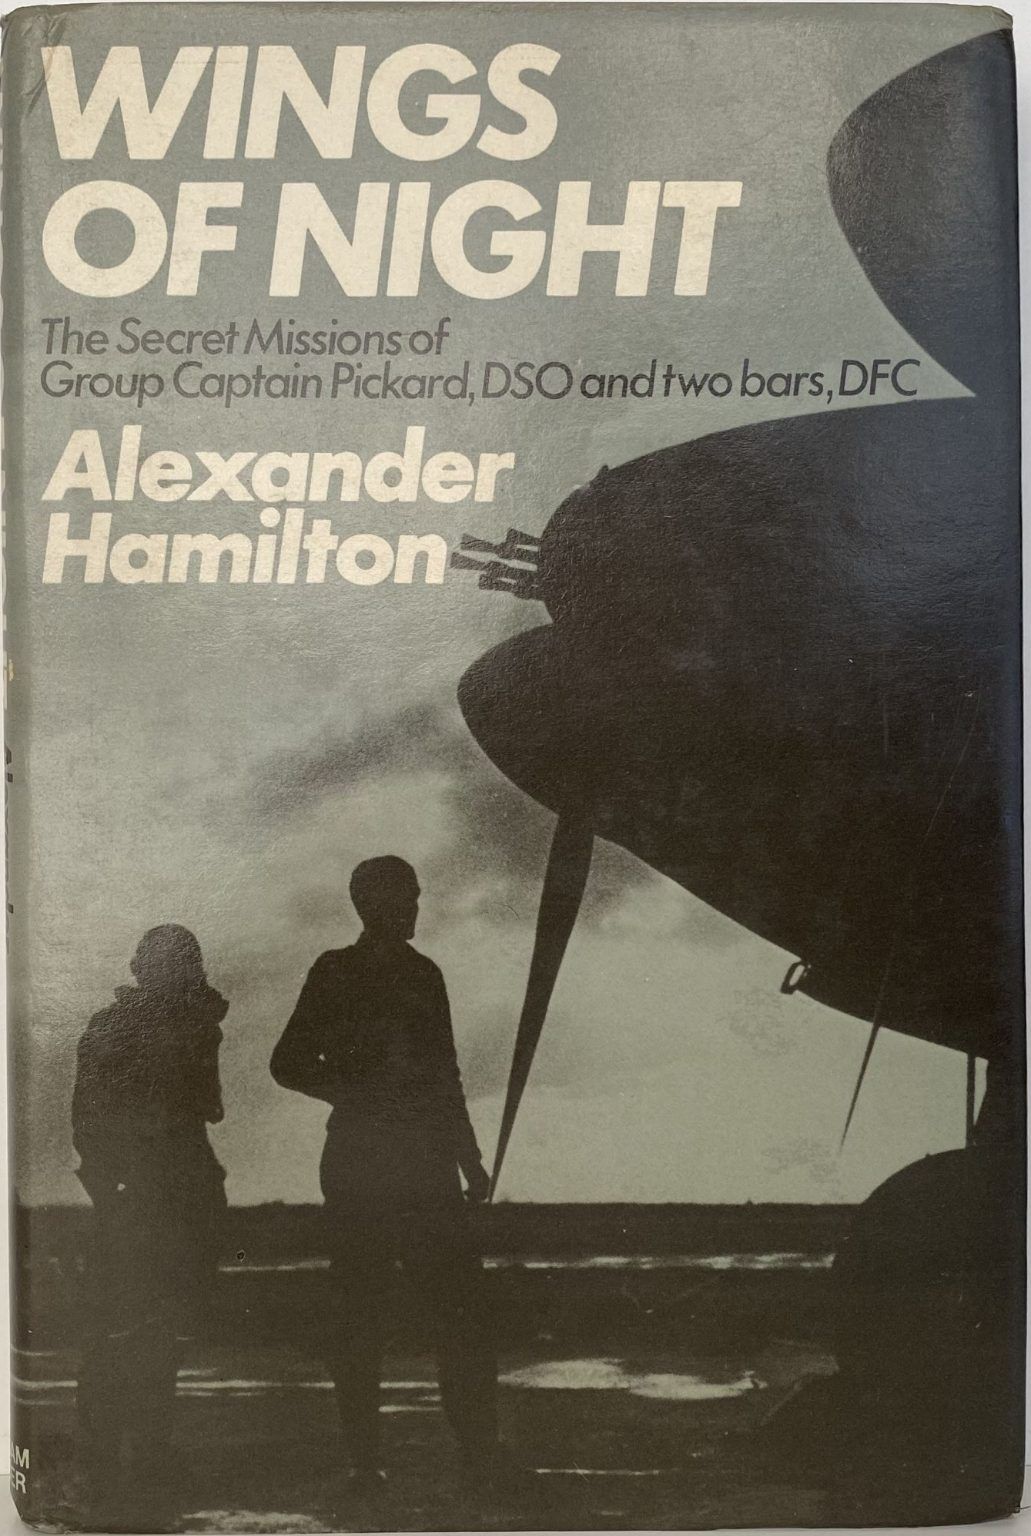 WINGS OF NIGHT: The Secret Missions of Group Captain Pickard